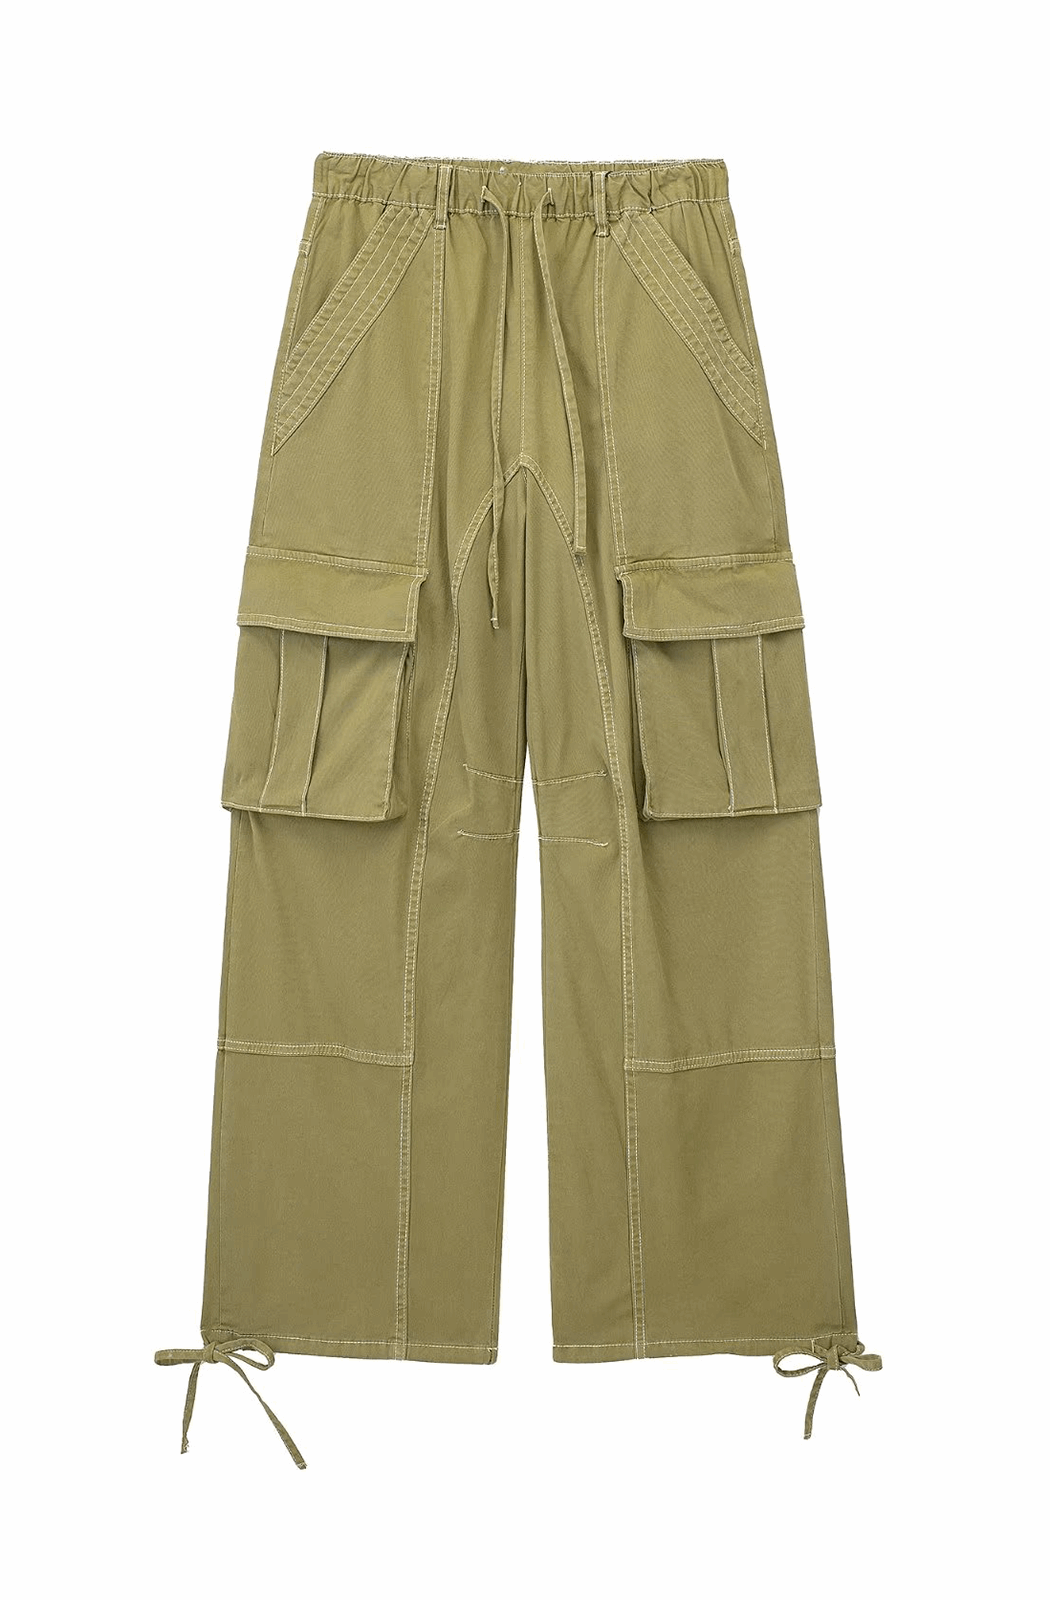 Army green cargo pants